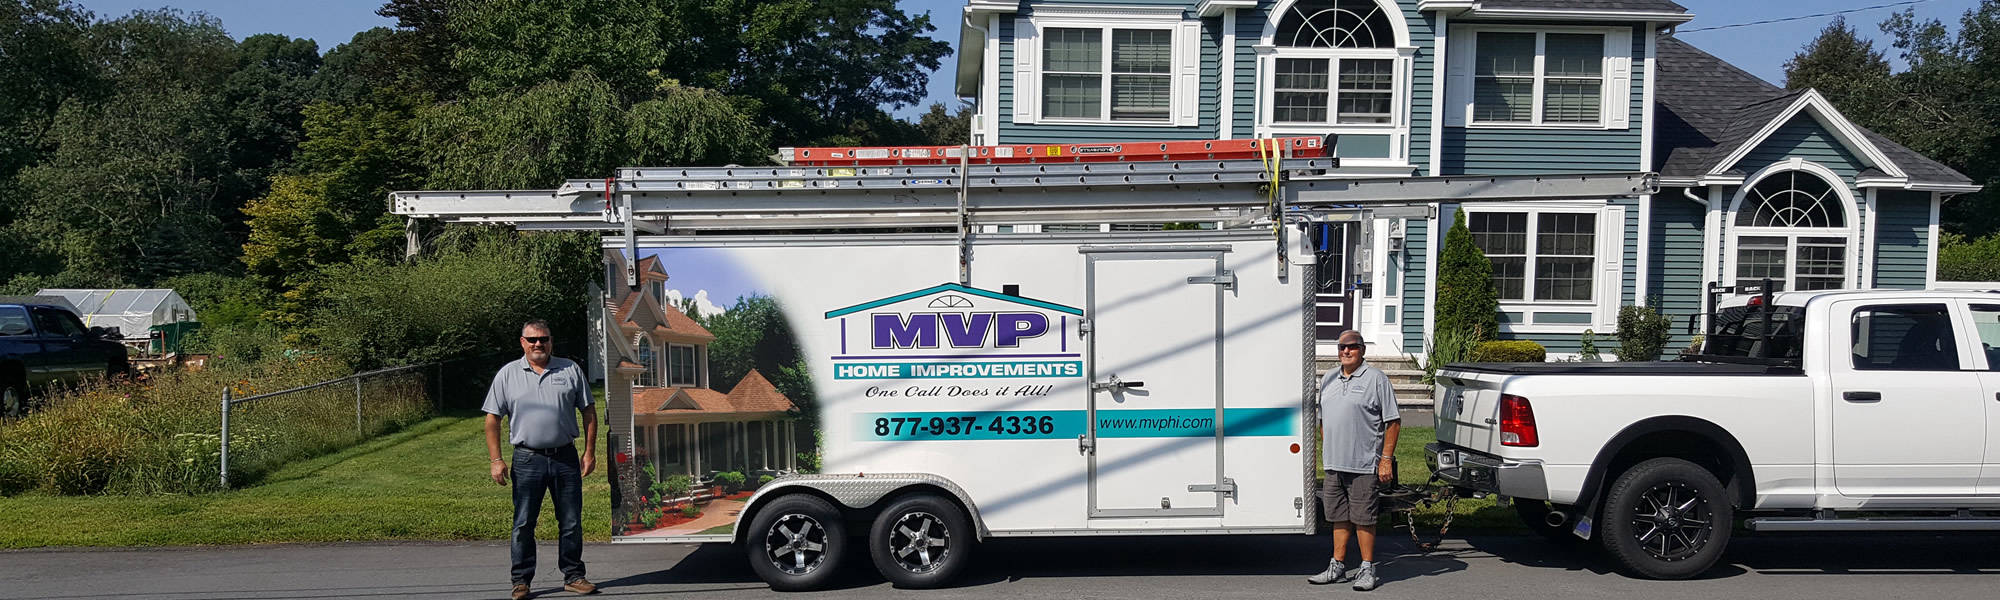 MVP Home Improvements - Commercial Contractor serving Merrimack Valley and Southern New Hampshire